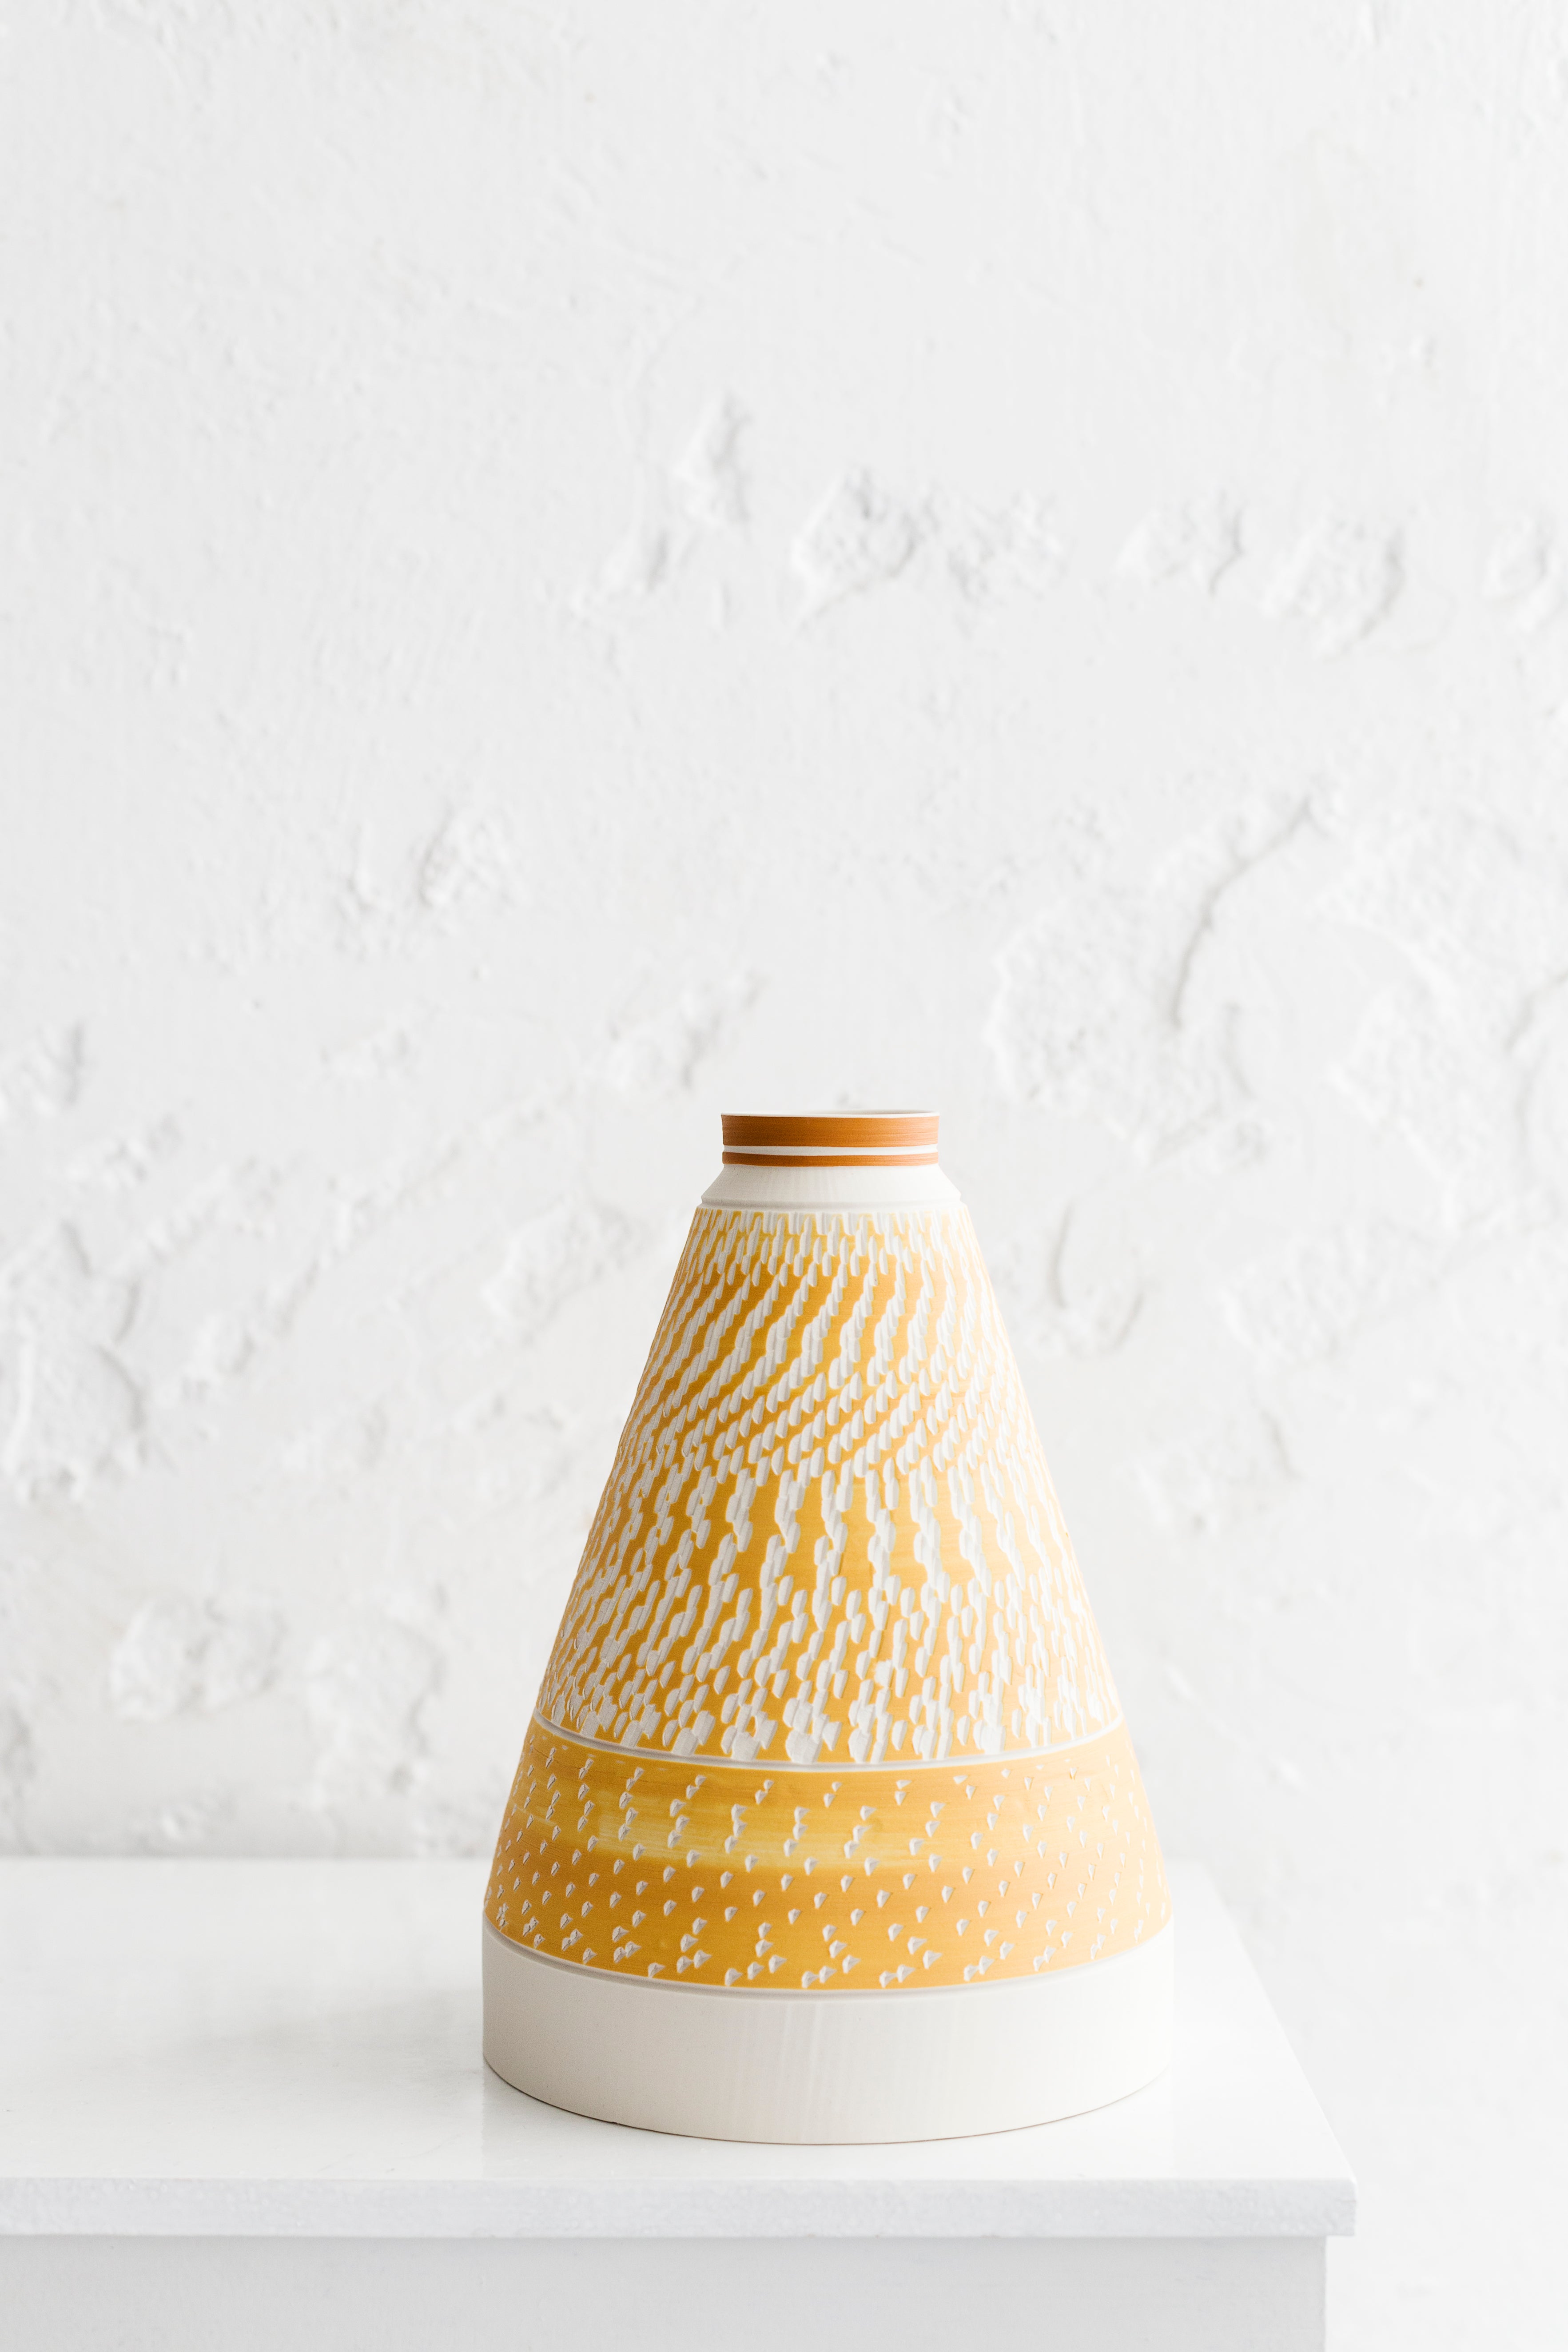 Tall ochre pyramid vase with chattering decoration